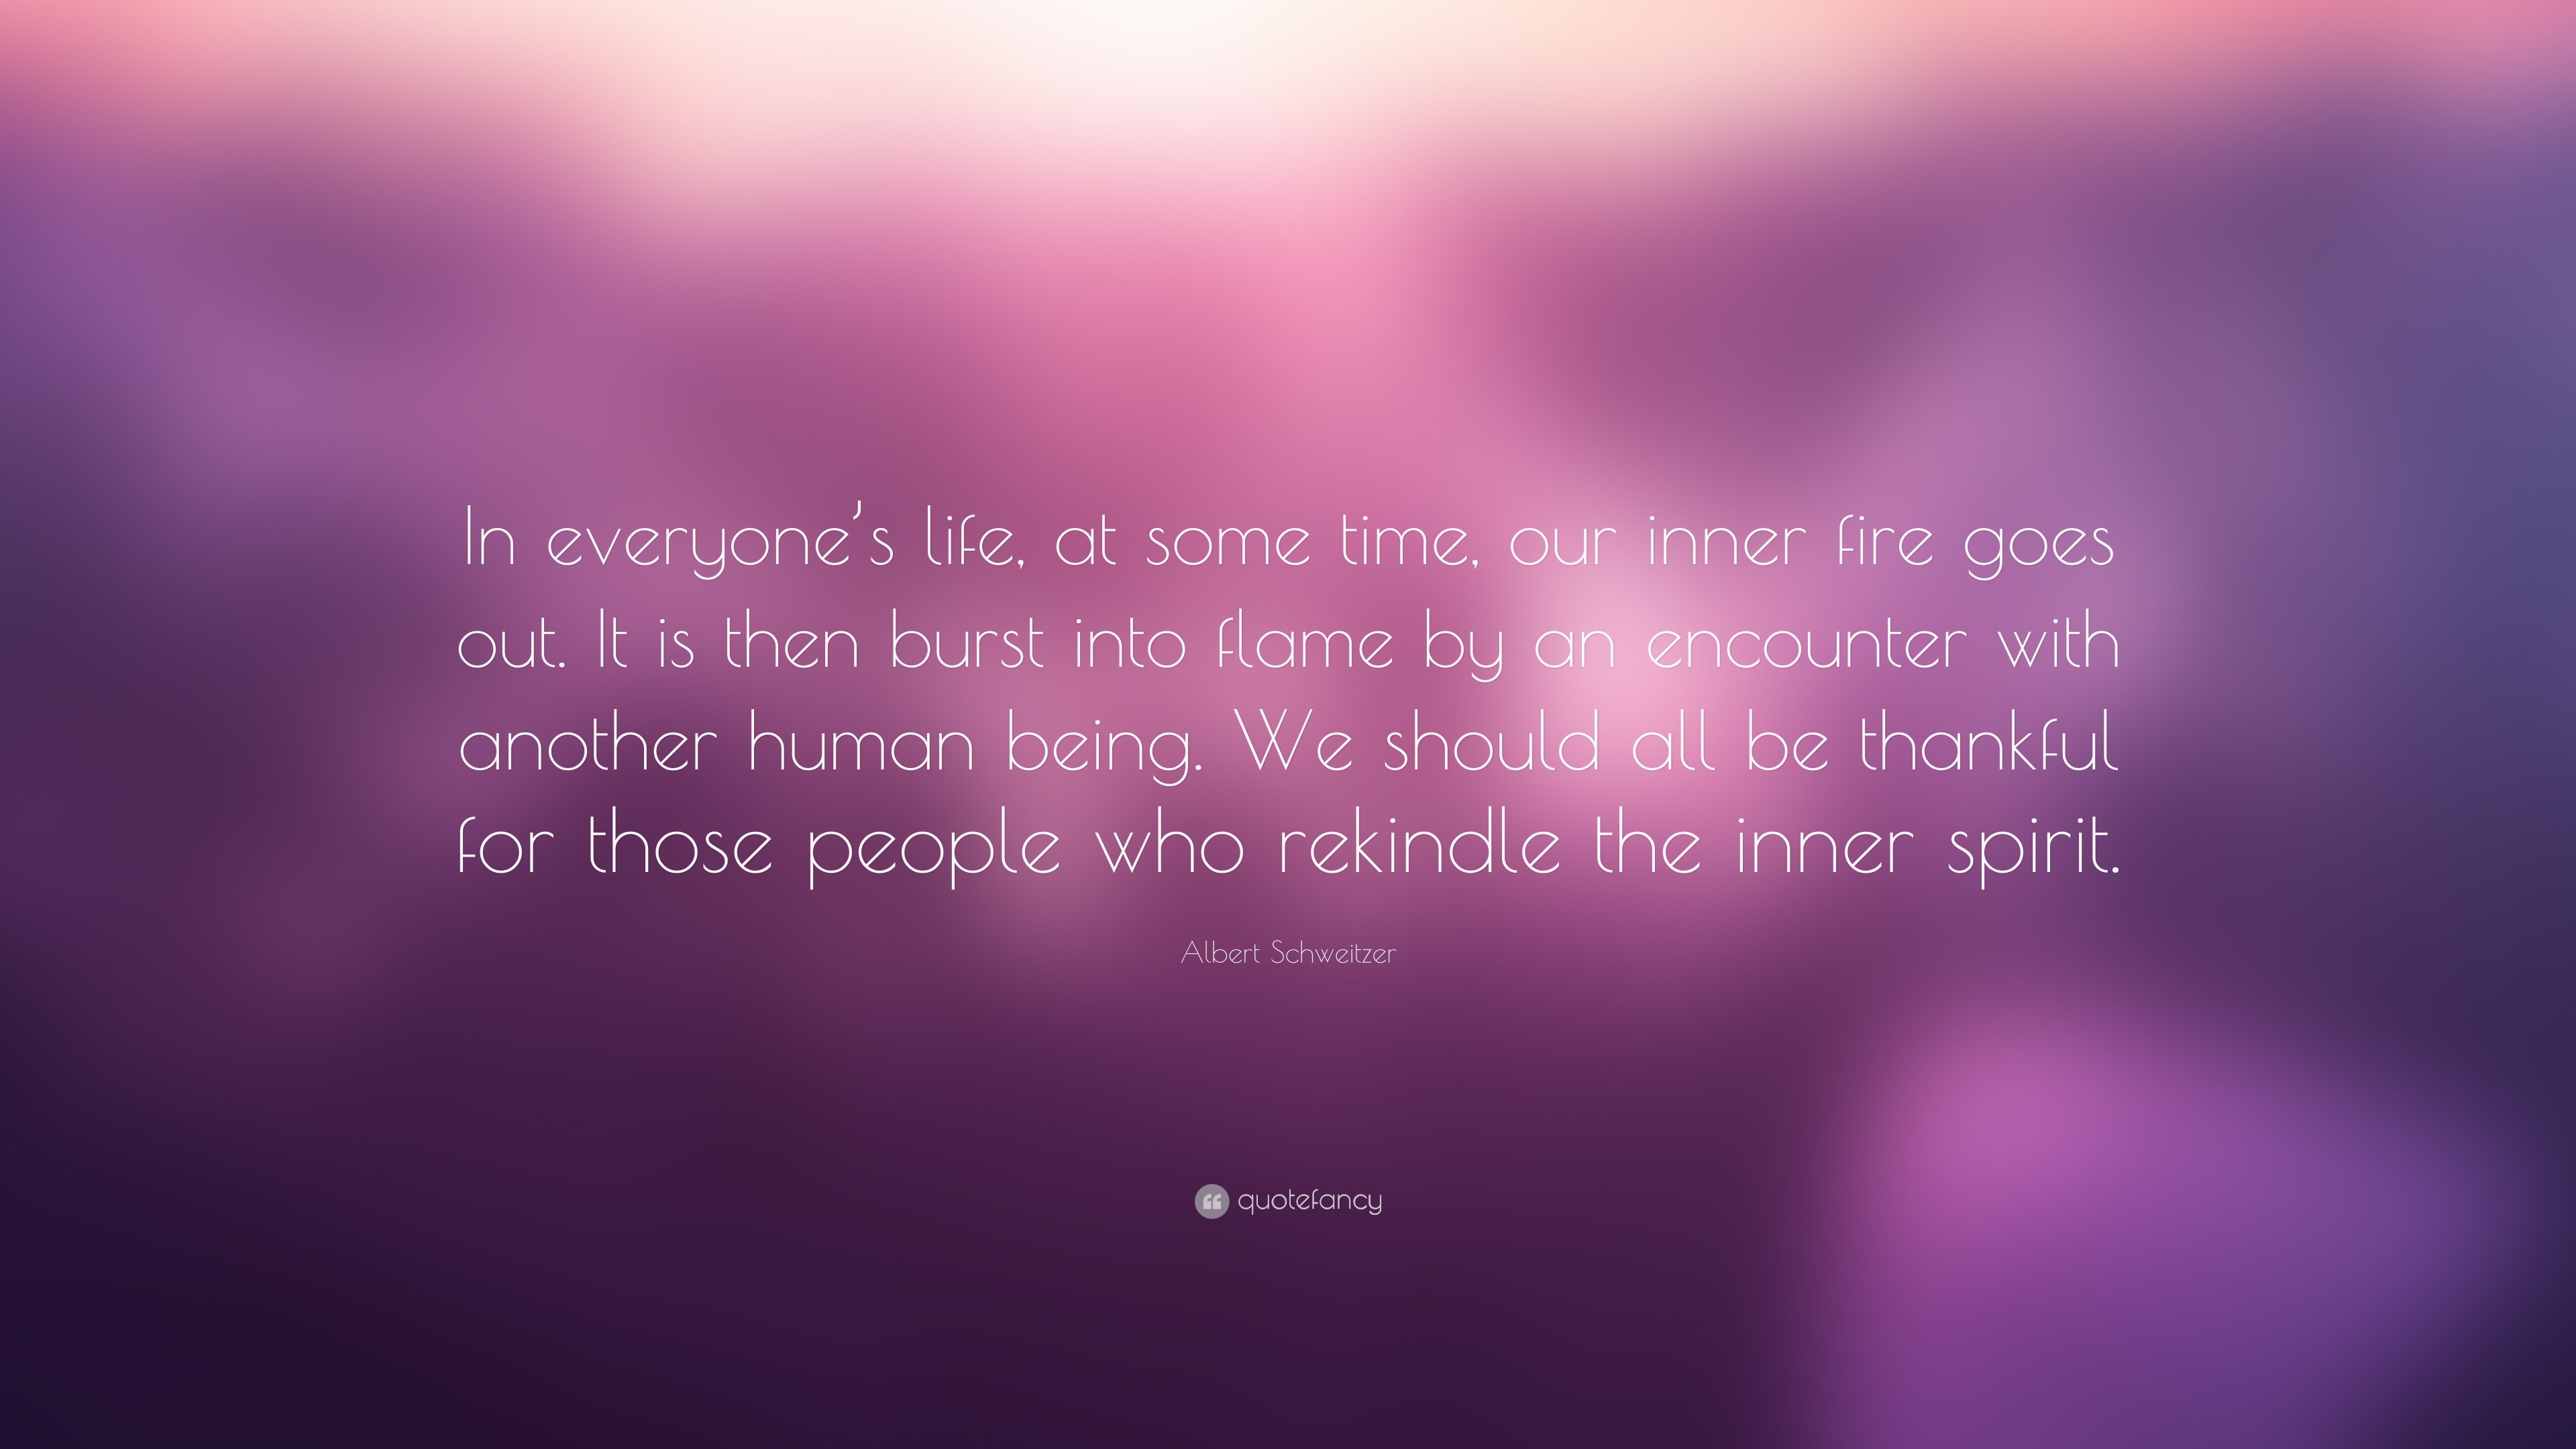 Flame, “In everyone's life, at some time, our inner fire go…